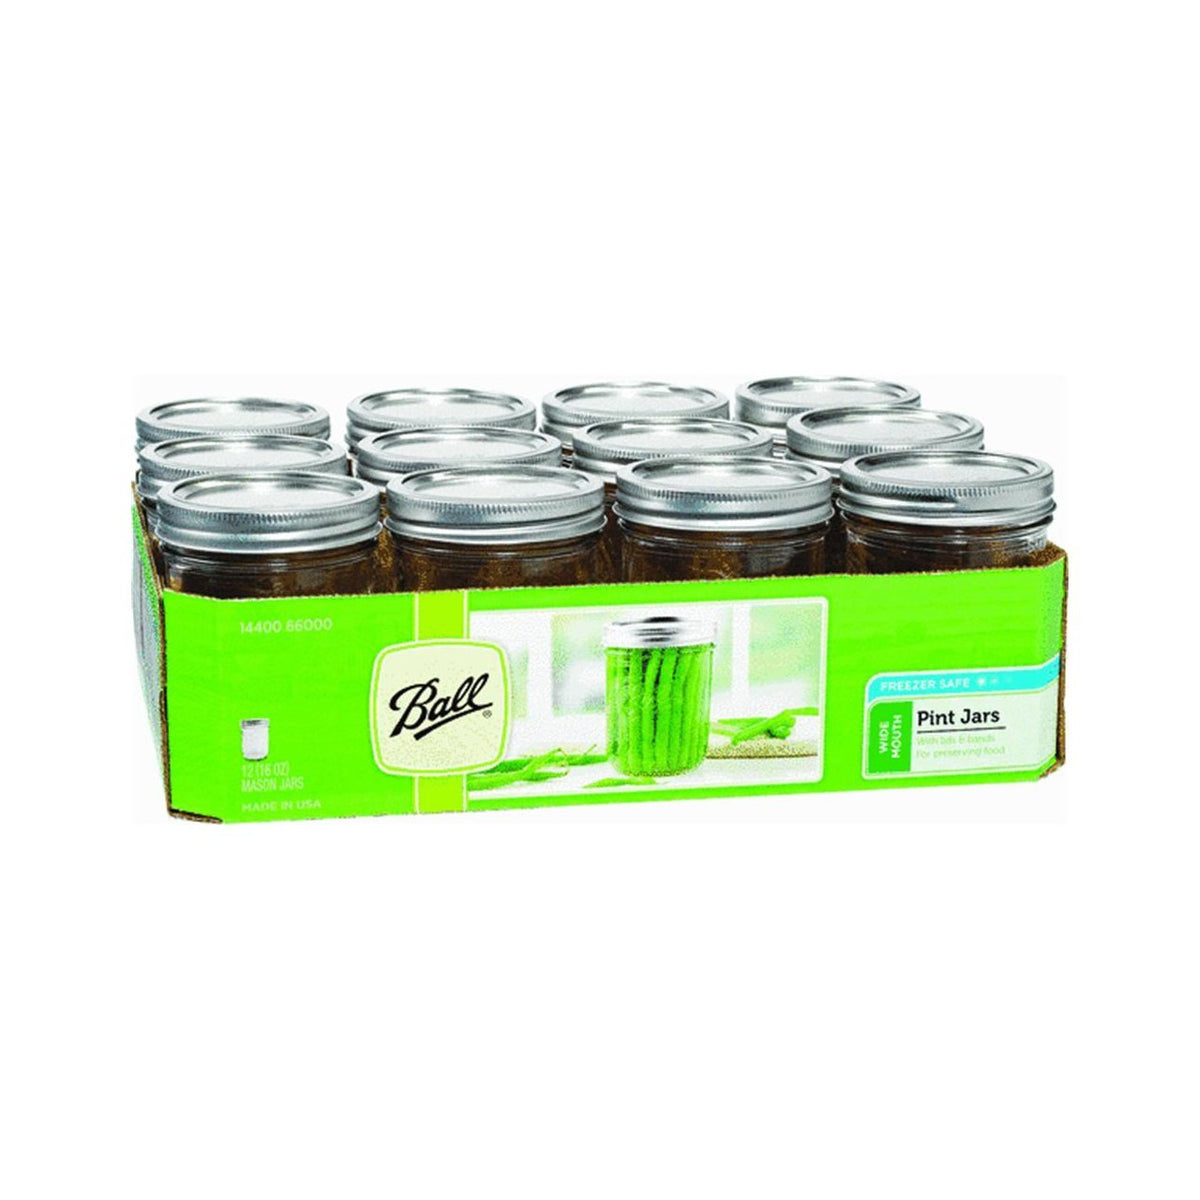 Ball 66000 Wide Mouth Mason Jar with Lids & Bands, 1 Pint, 12-Pack